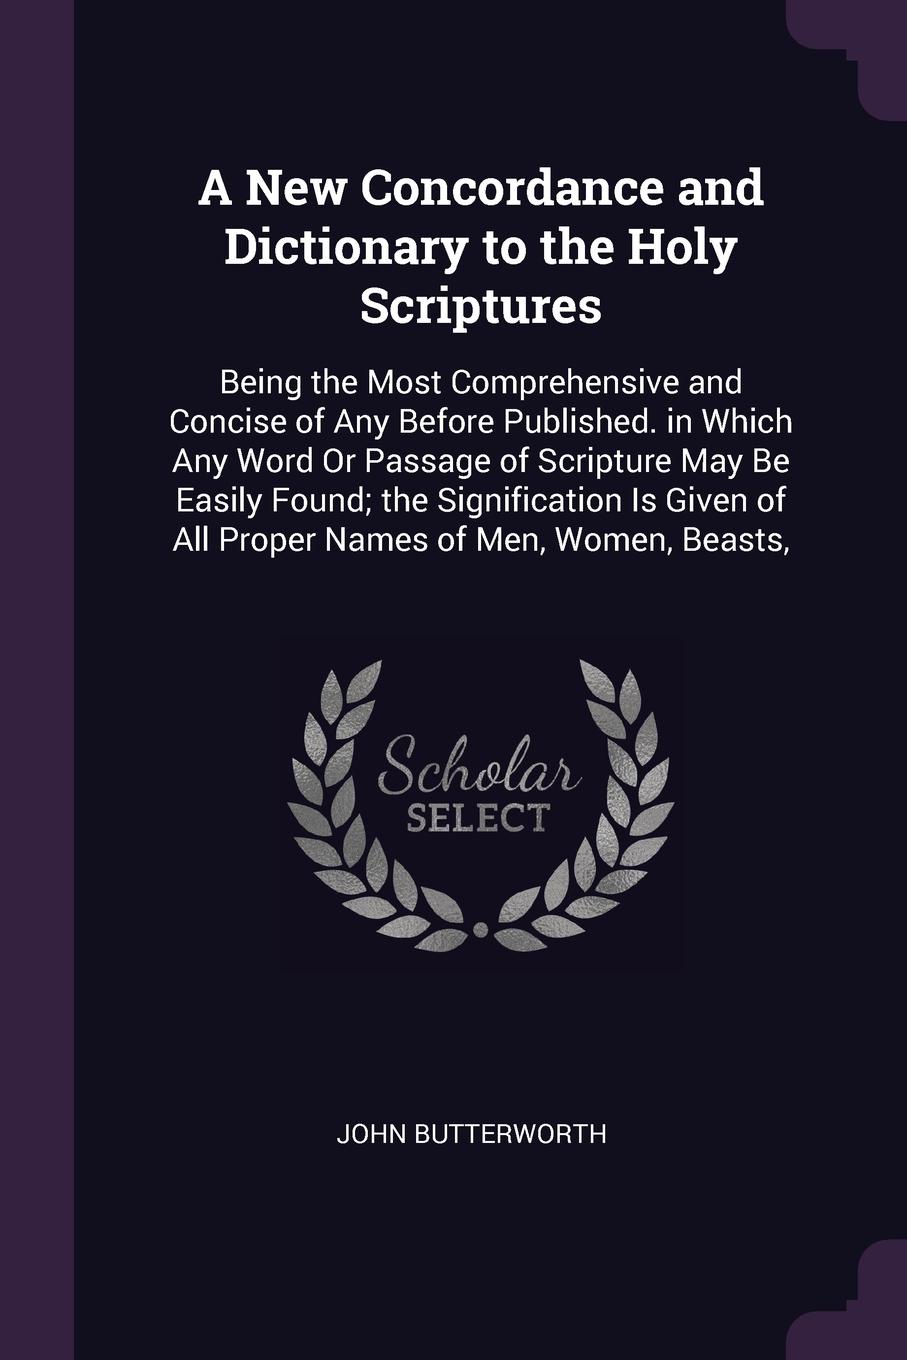 A New Concordance and Dictionary to the Holy Scriptures. Being the Most Comprehensive and Concise of Any Before Published. in Which Any Word Or Passage of Scripture May Be Easily Found; the Signification Is Given of All Proper Names of Men, Women,...